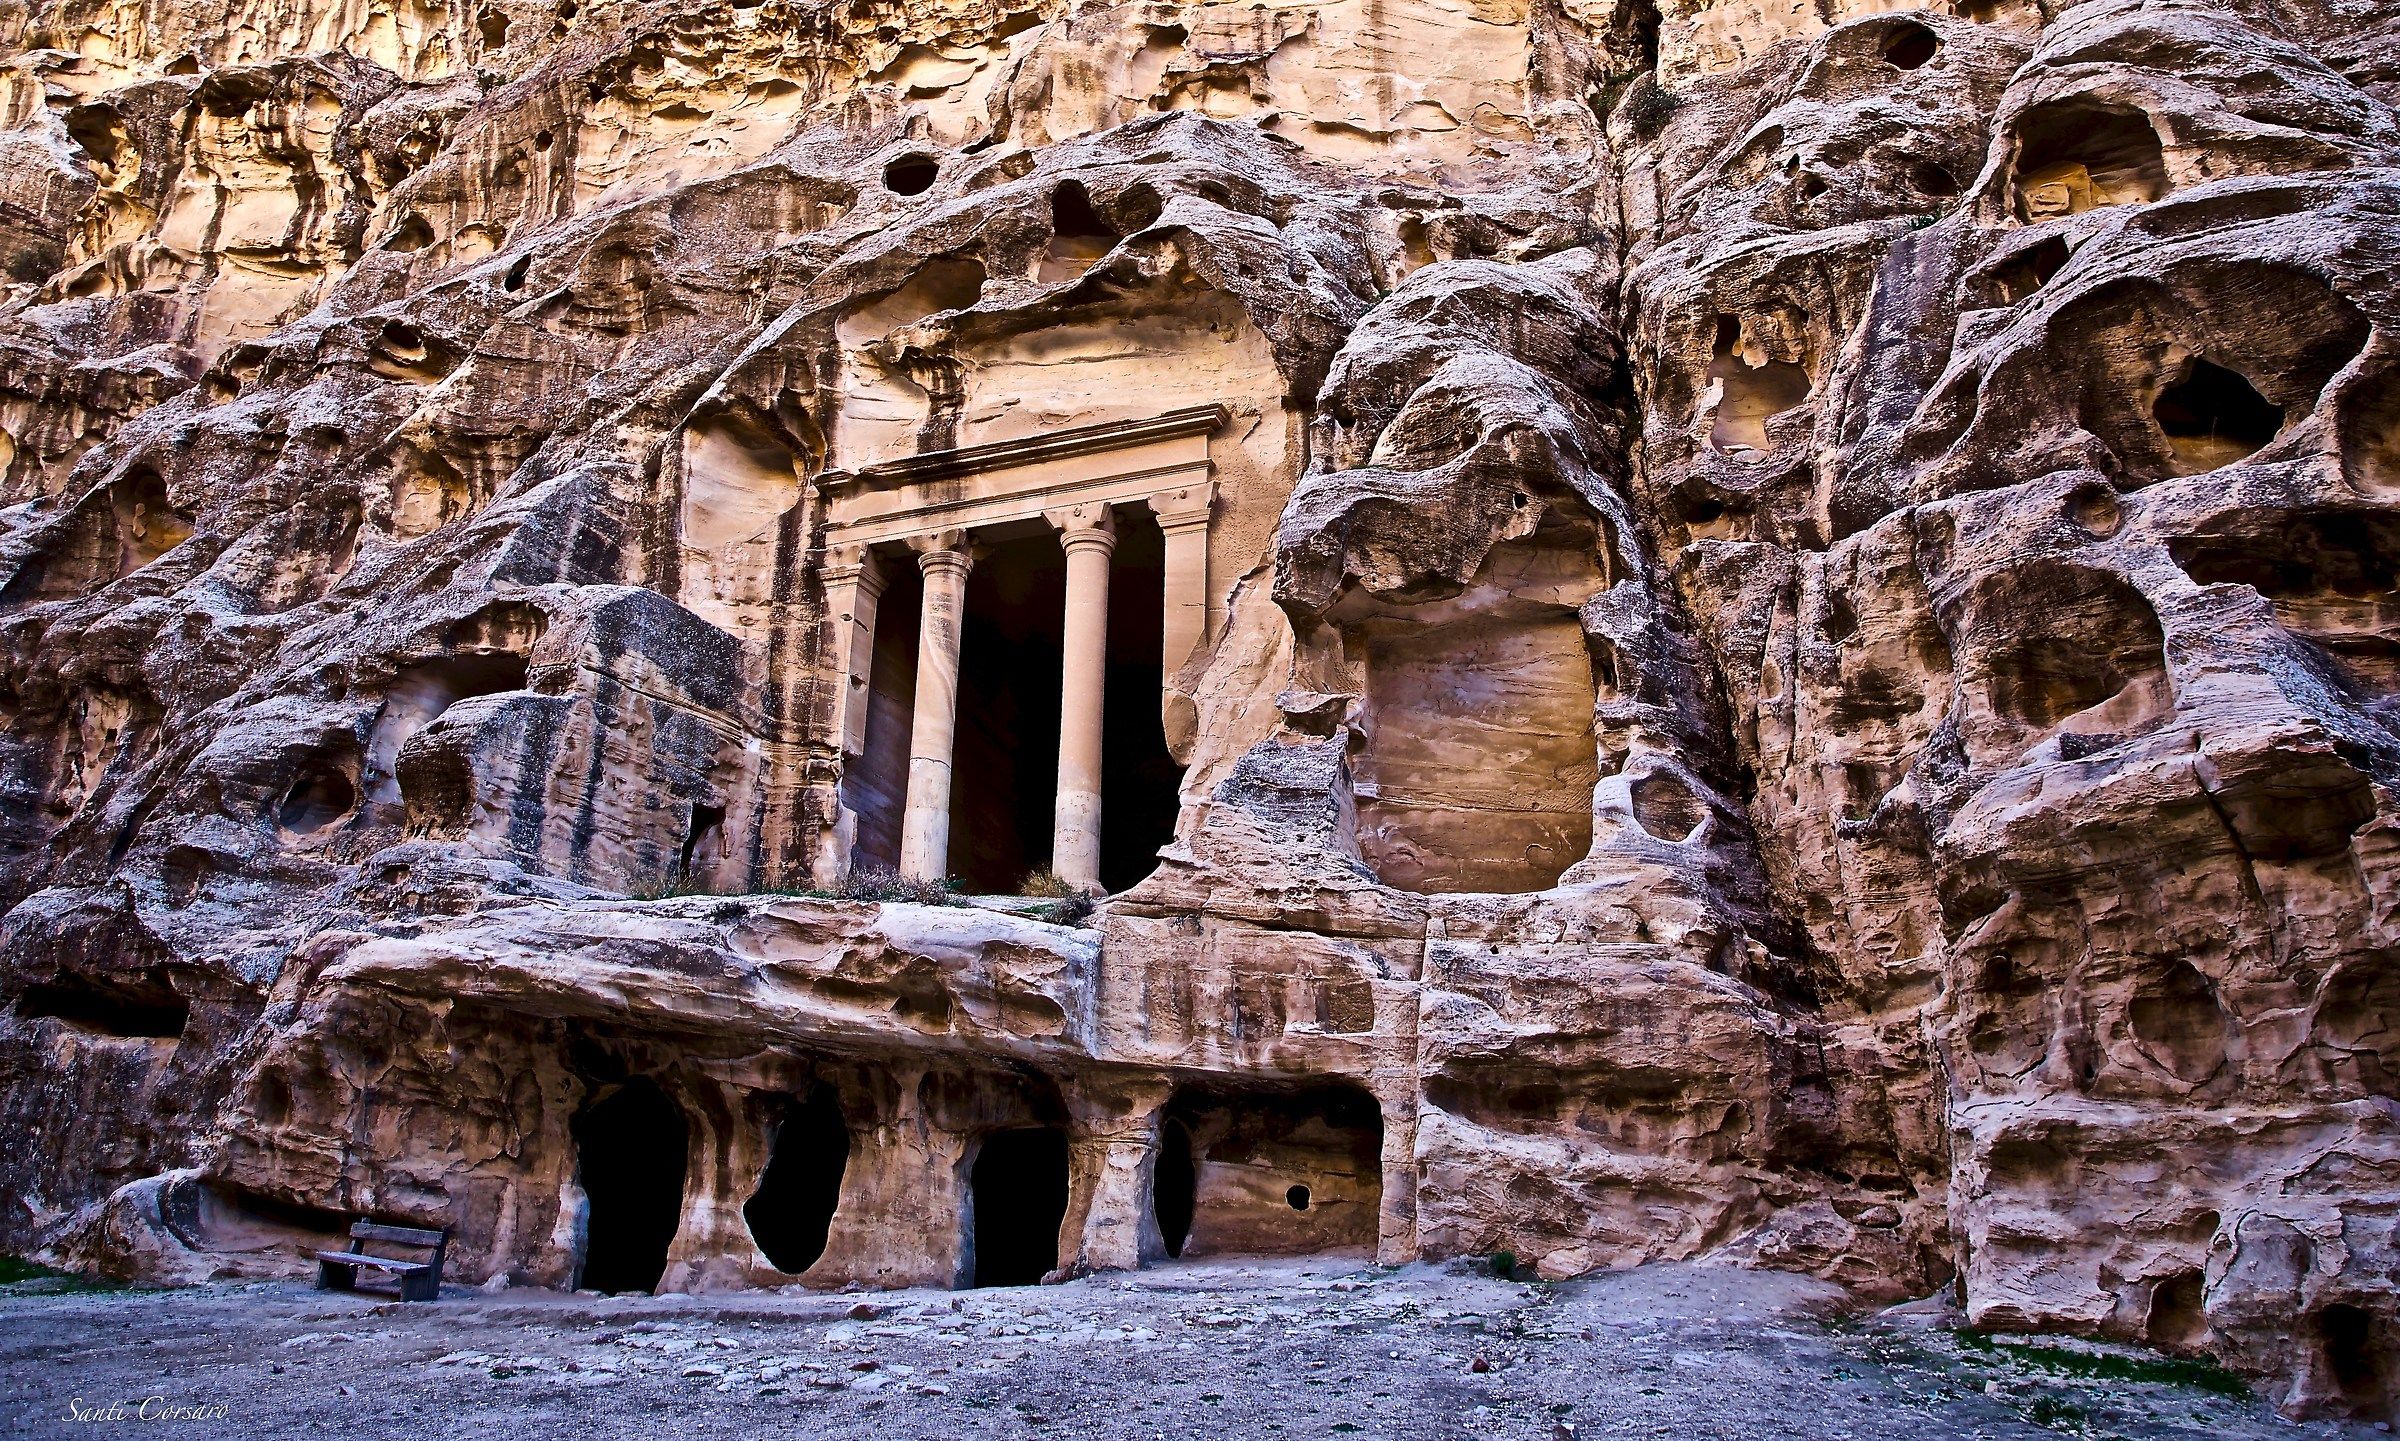 The trabeculae of Little Petra...